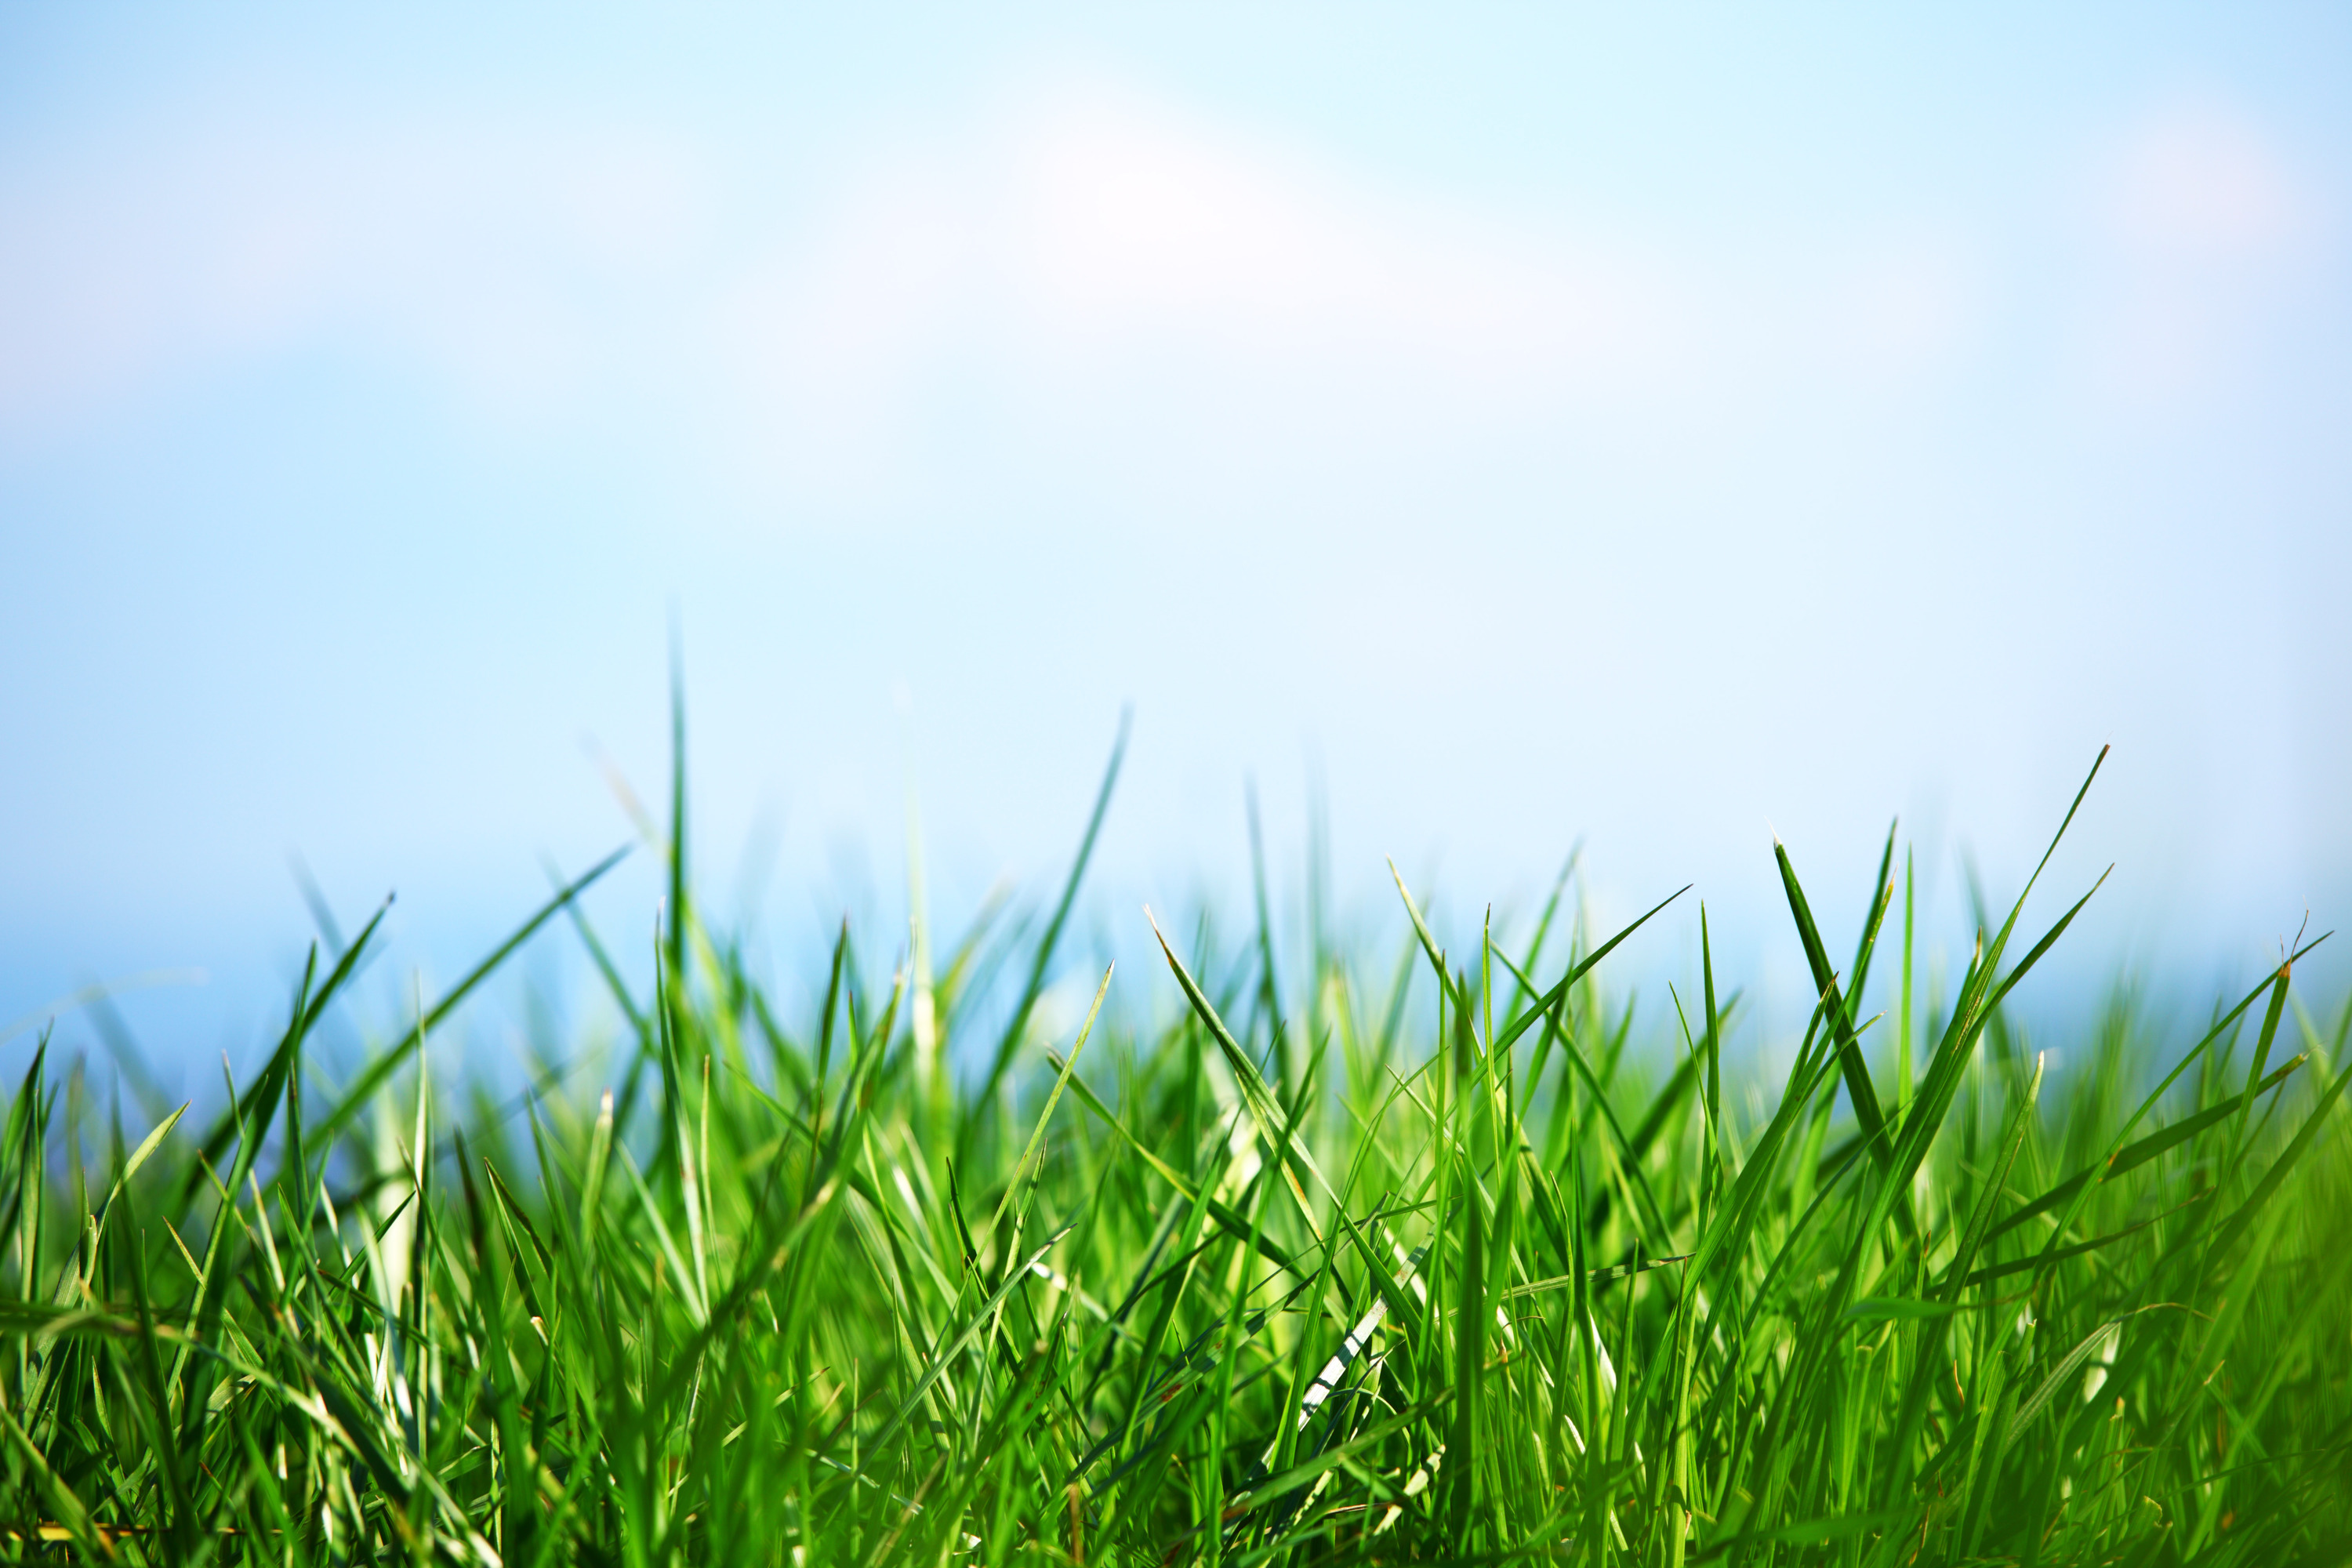 Where The Green Grass Grows | Daily Inspired Musings